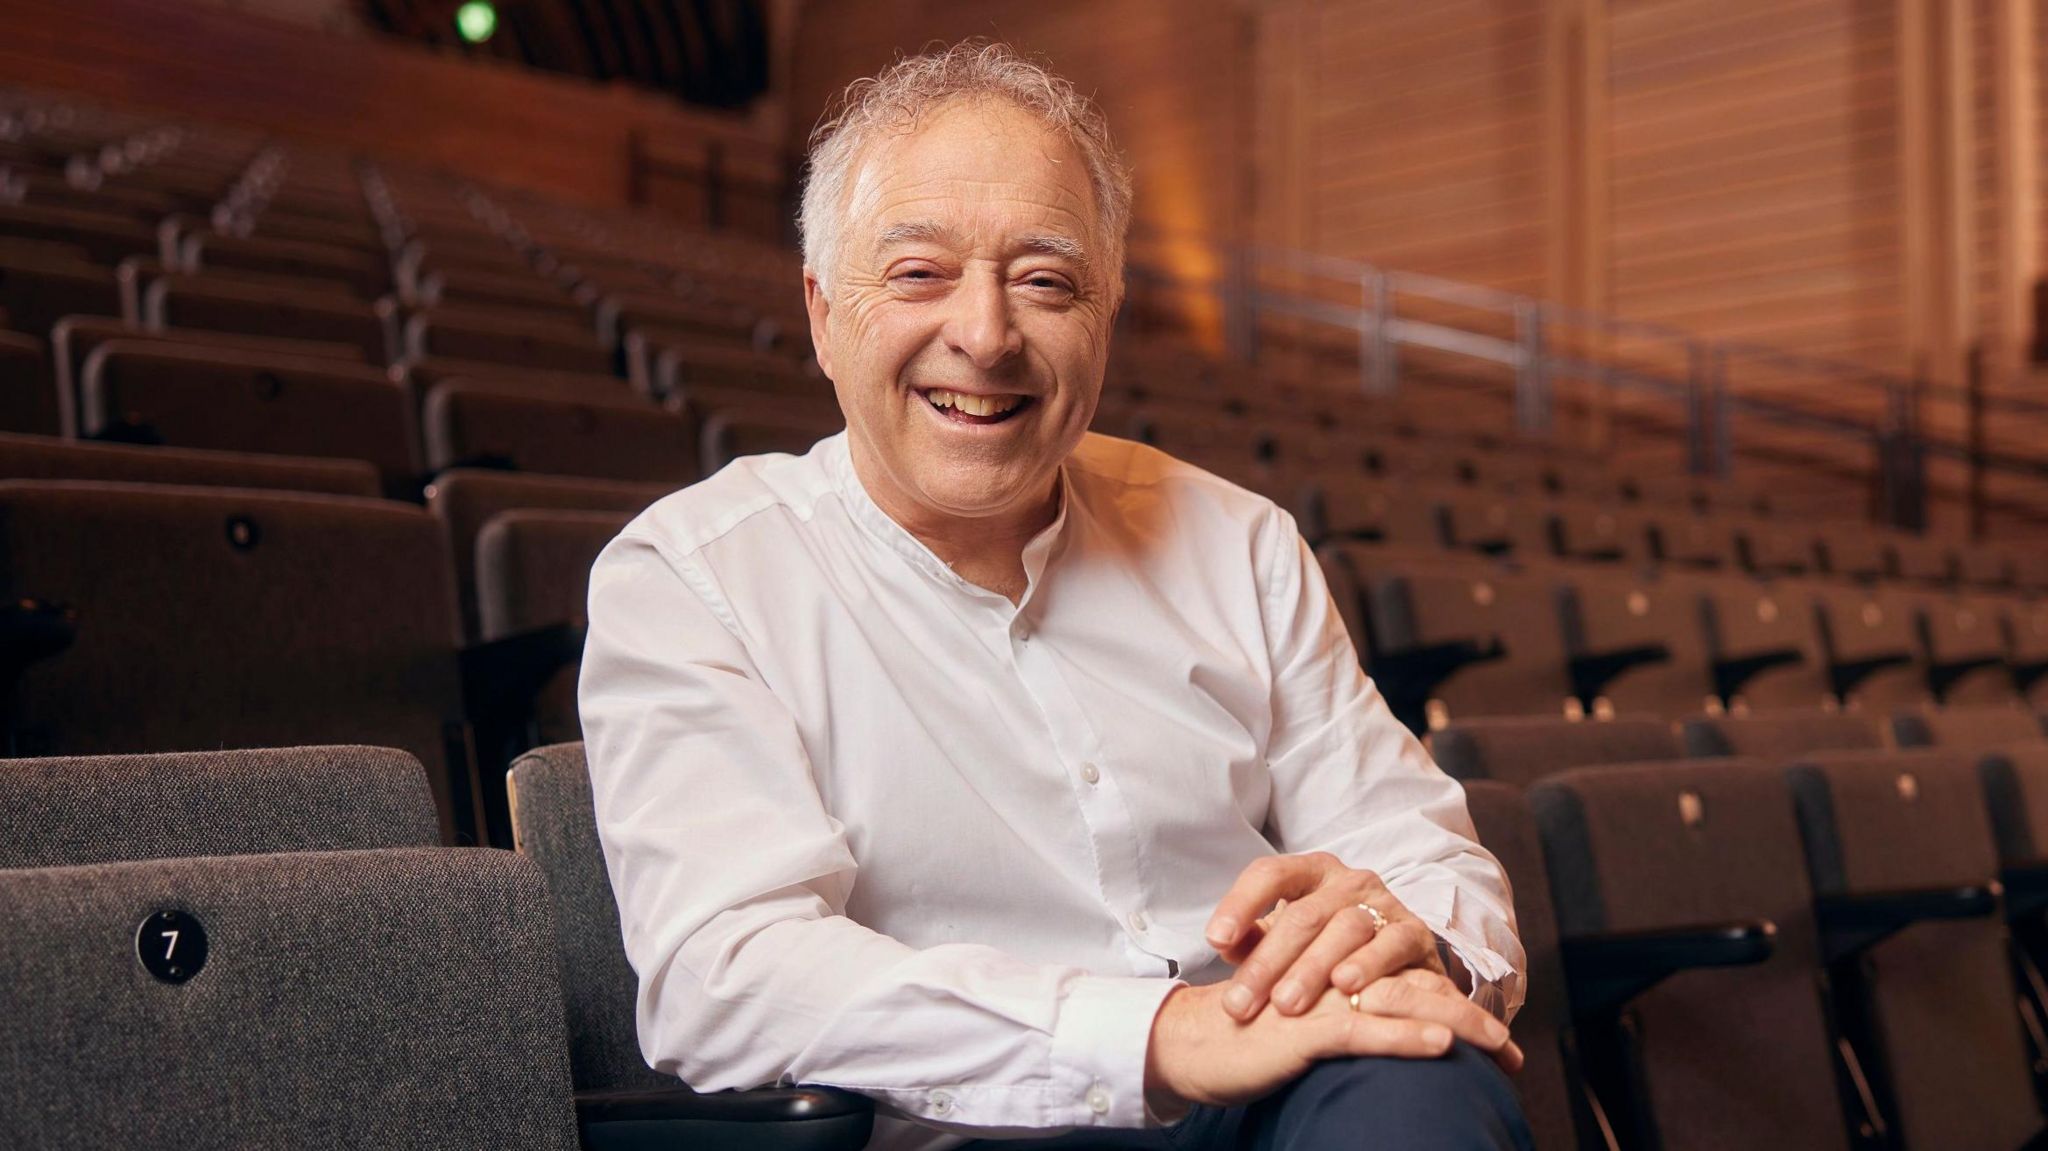 Frank Cottrell-Boyce sits in an arts venue